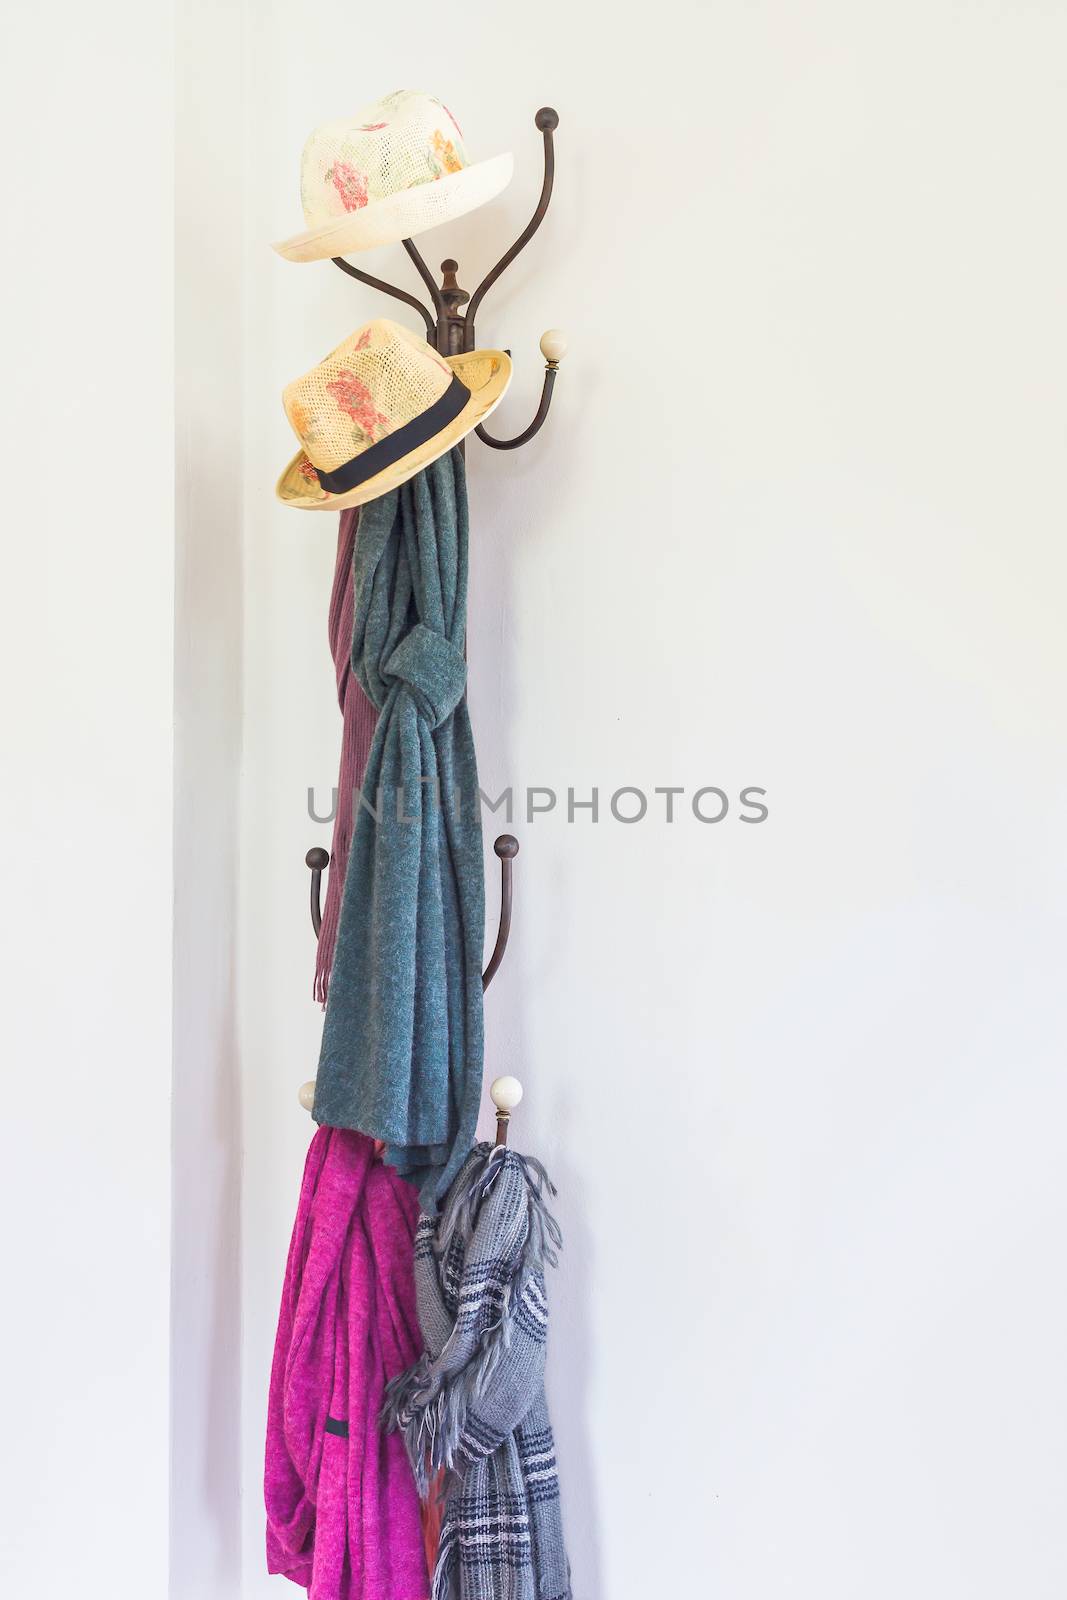 vintage Hat Stand and hanger clothes set on white wall